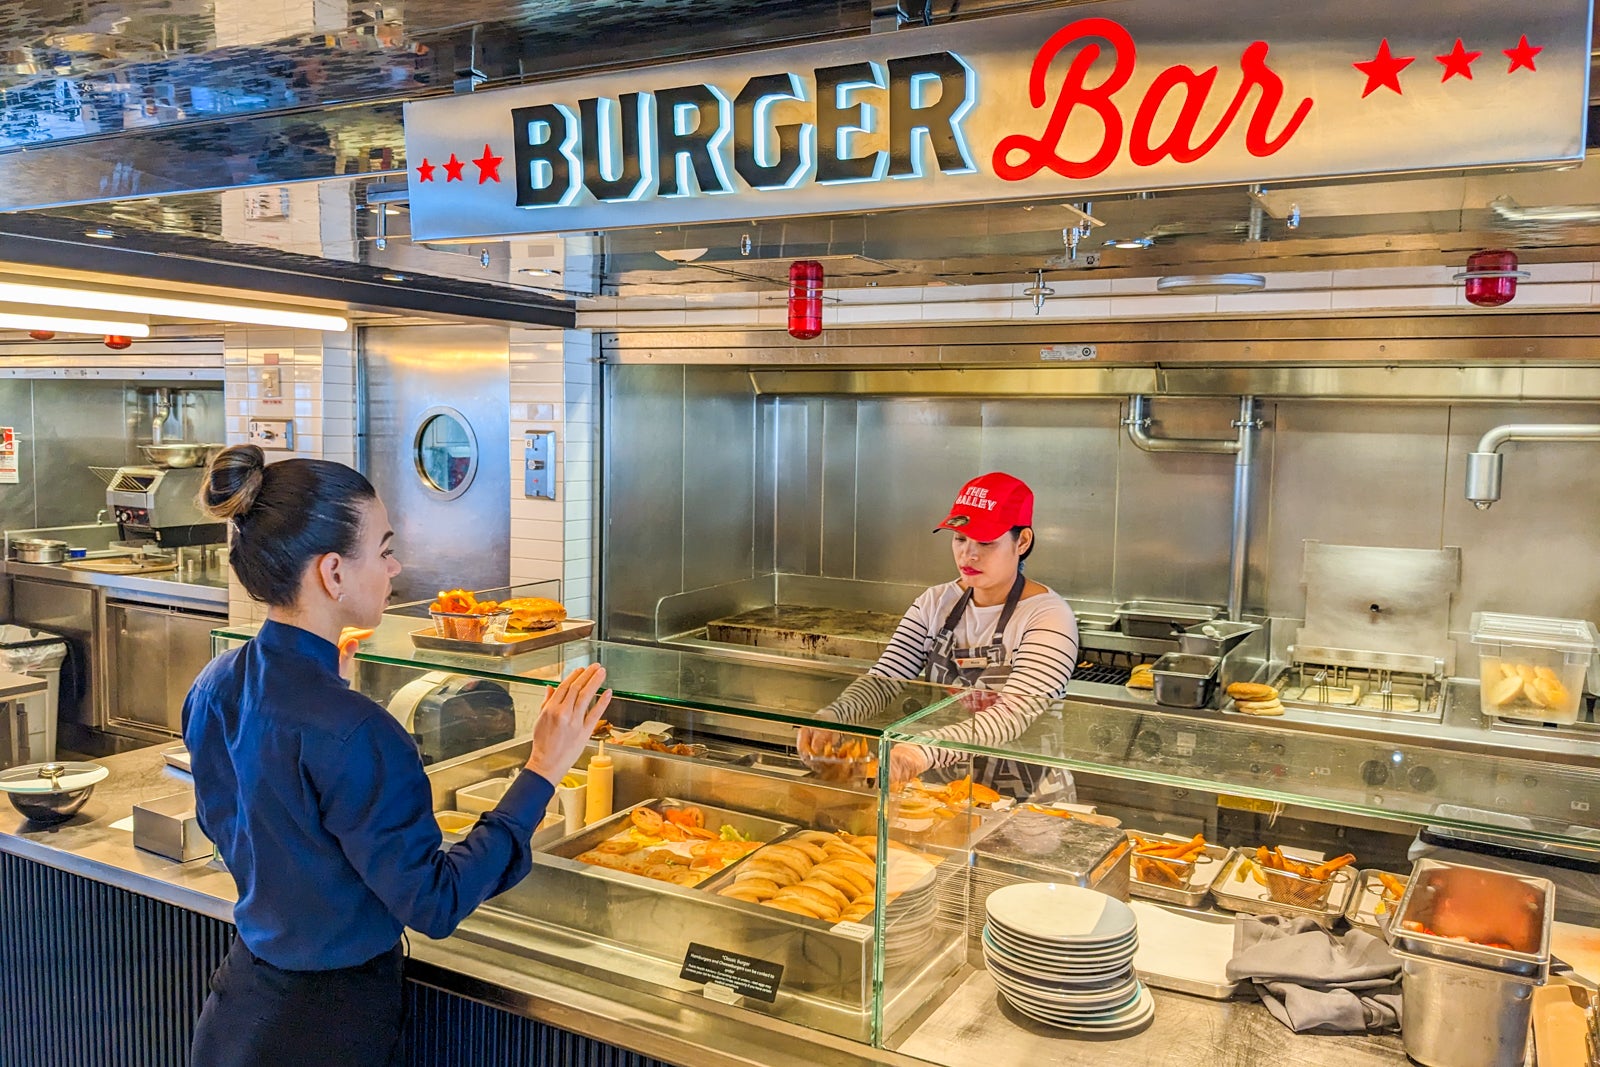 Burger Bar counter with chef and server